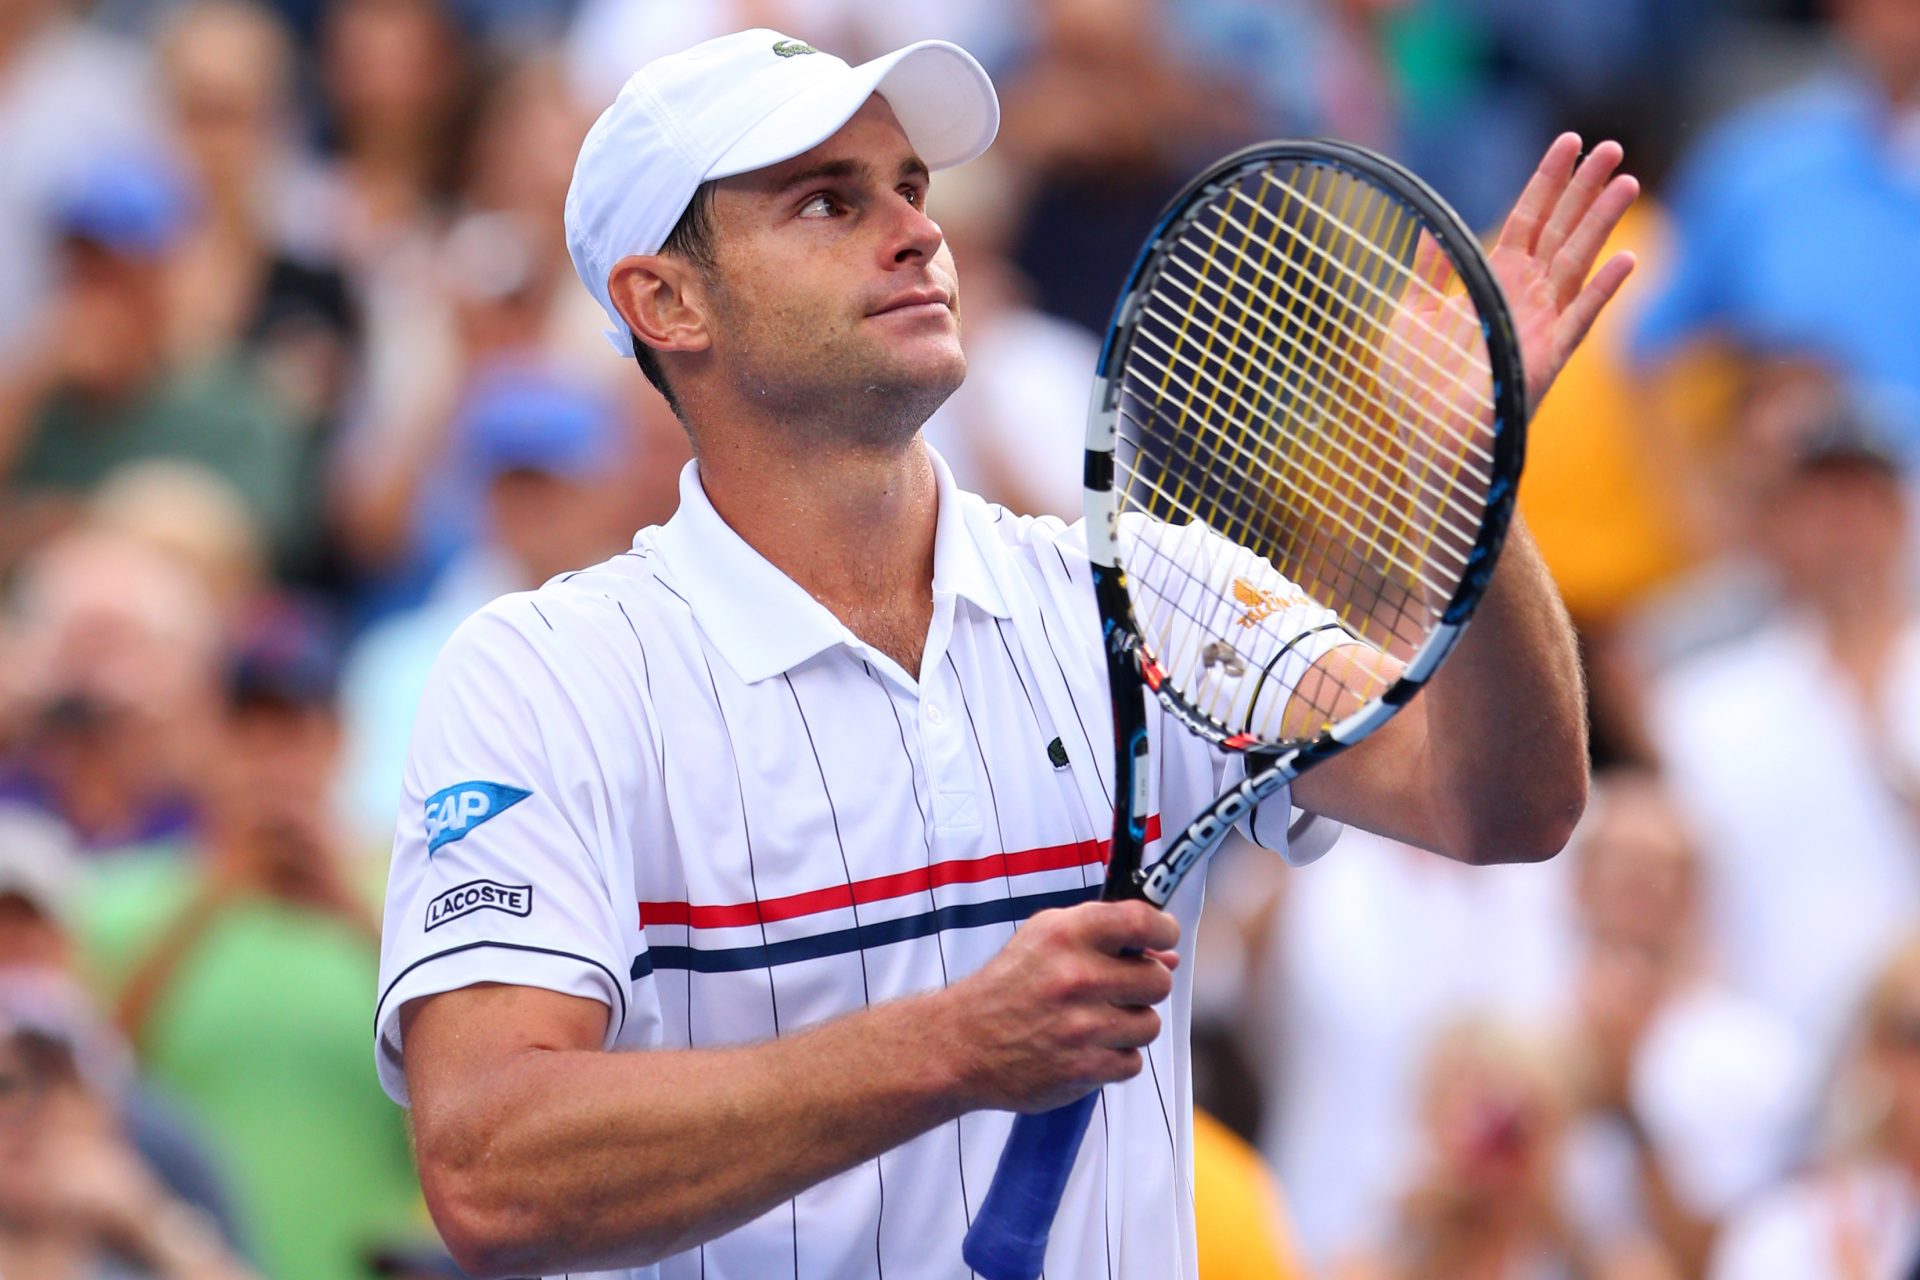 Andy Roddick opens up about his battle with cancer